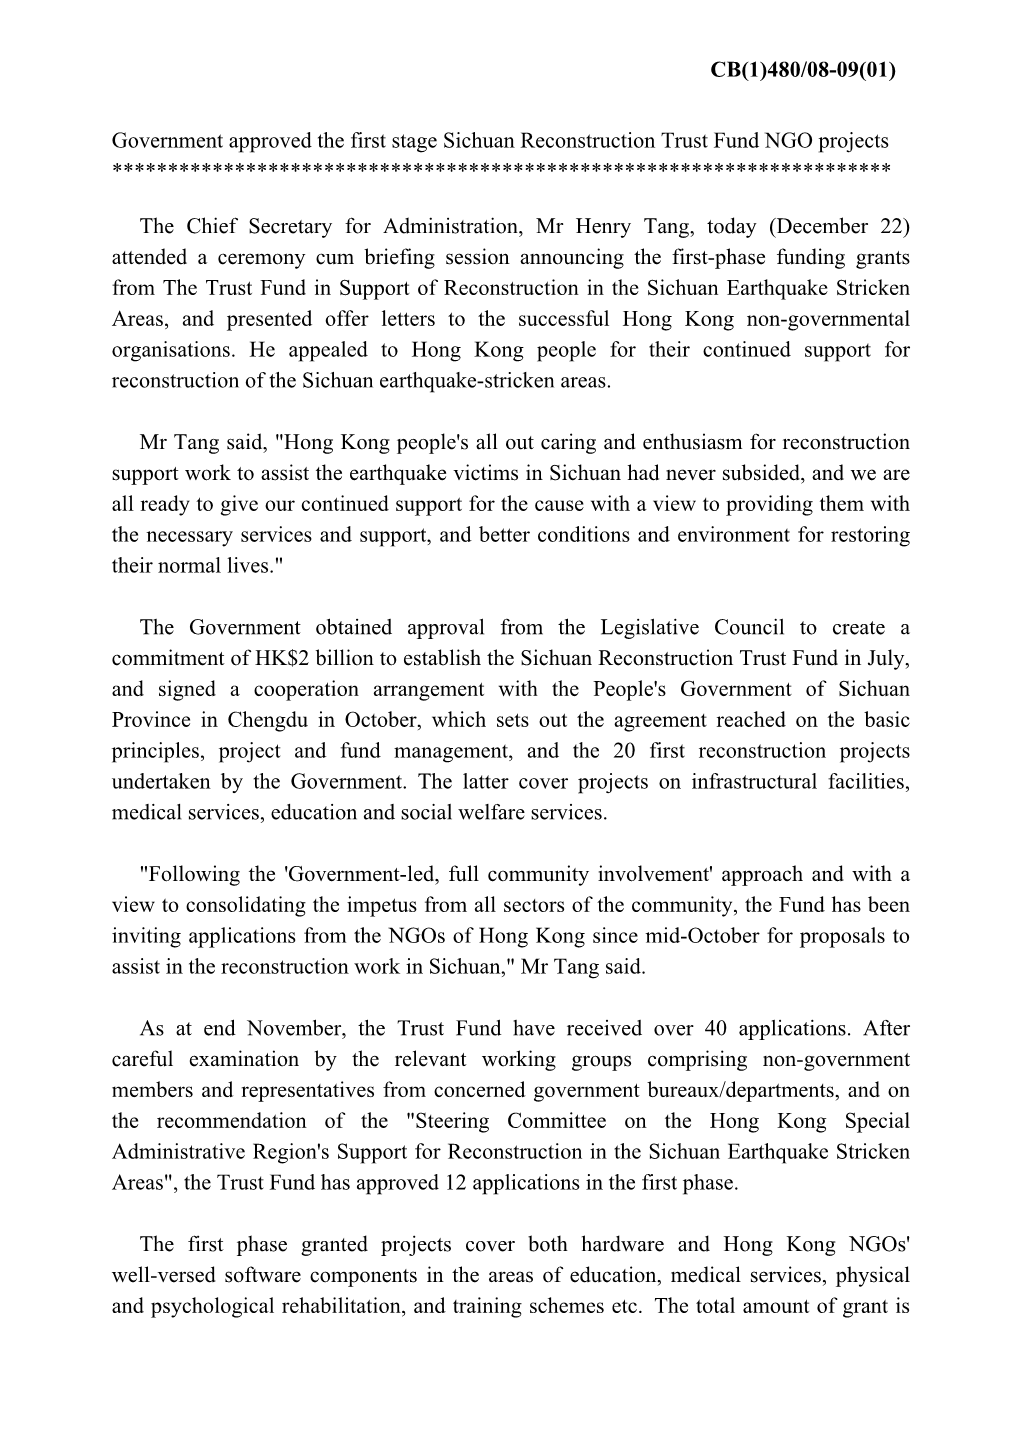 Government Approved the First Stage Sichuan Reconstruction Trust Fund NGO Projects **********************************************************************